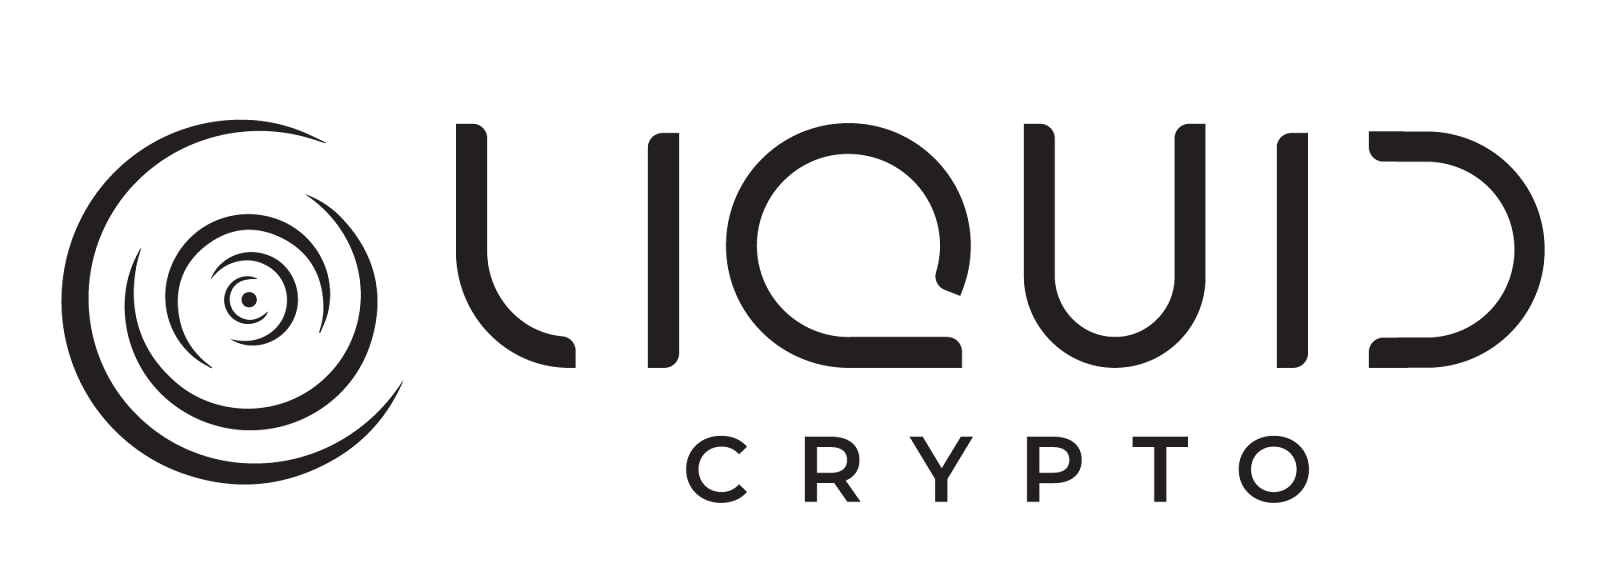 Liquid Crypto welcomes new partner ONUS Chain to its ecosystem, further strengthening its position as Australia’s leading Crypto platform.